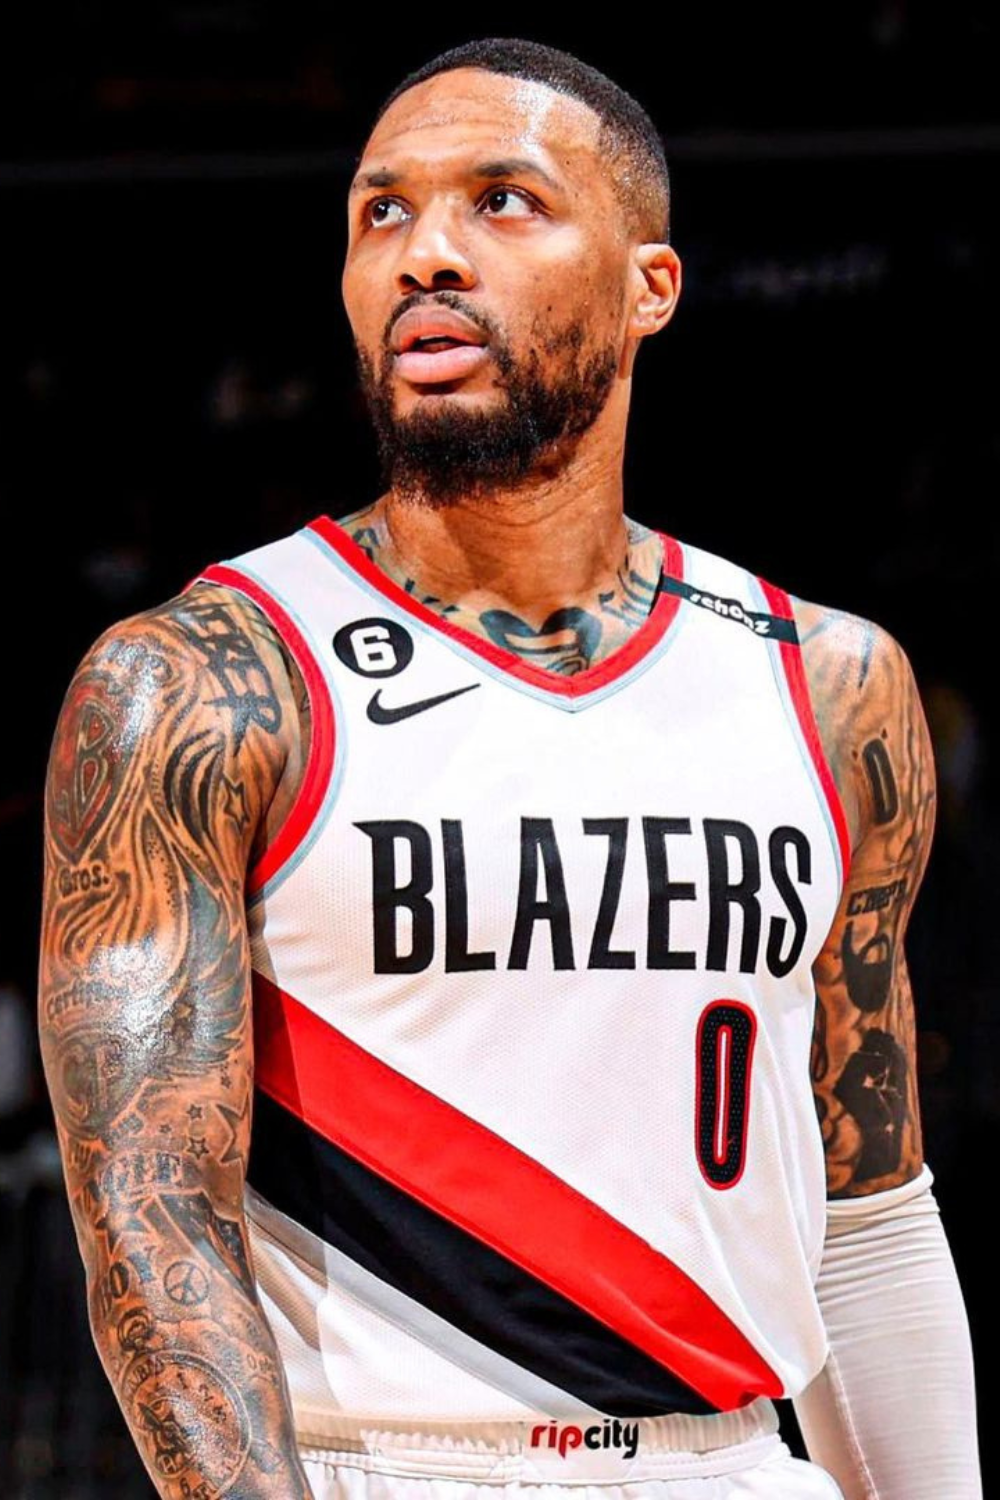 Damian Lillard, The Point Guard For The Blazers